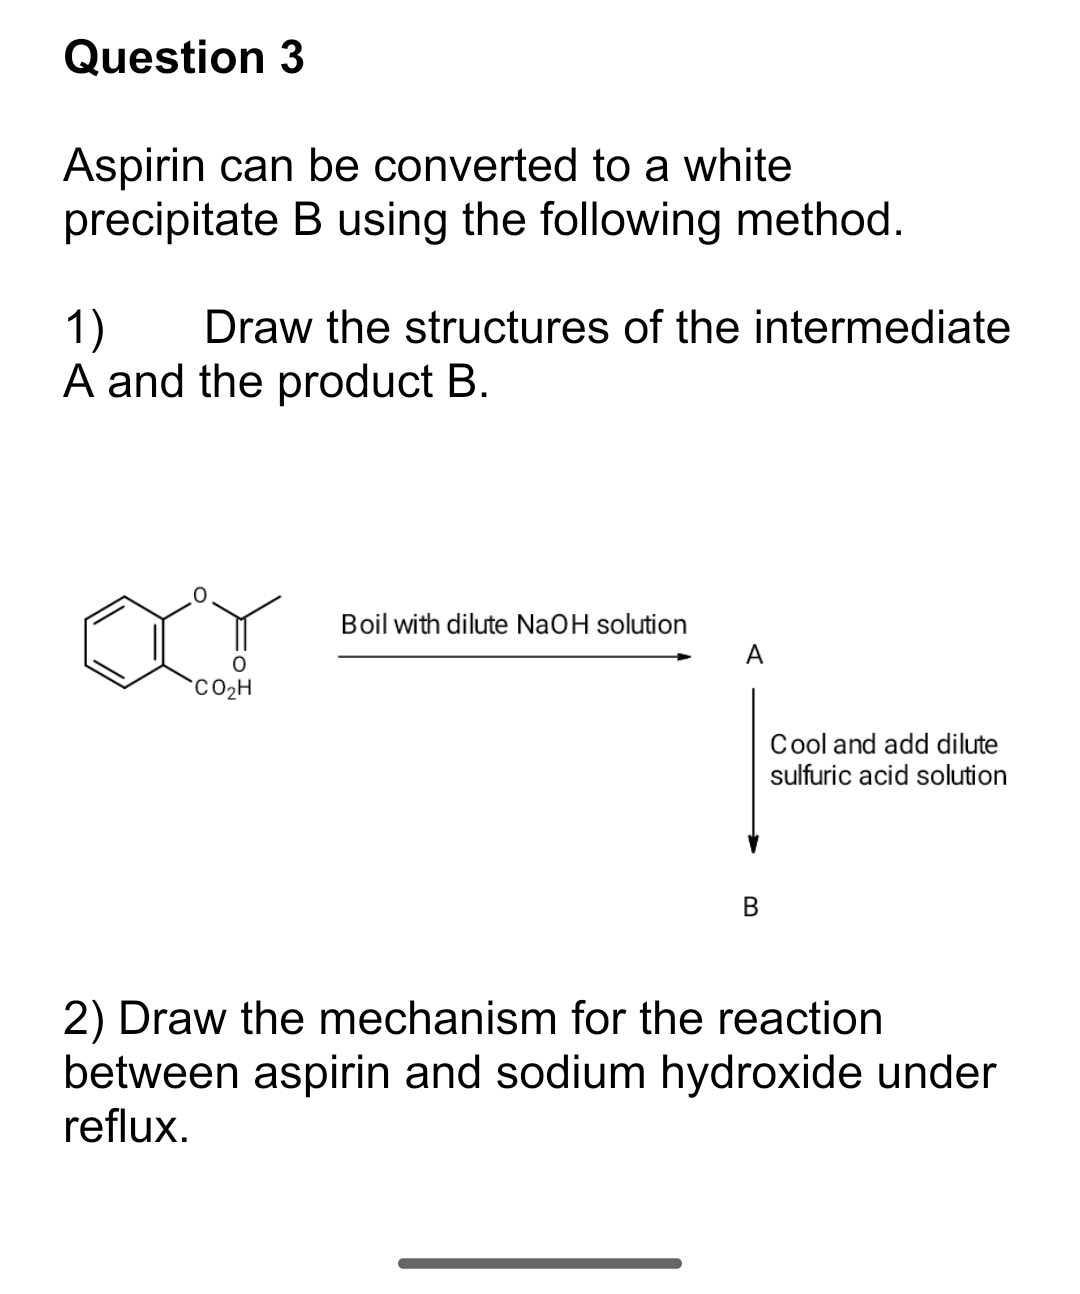 Question 3
Aspirin can be converted to a white
precipitate B using the following method.
1) Draw the structures of the intermediate
A and the product B.
CO₂H
Boil with dilute NaOH solution
A
B
Cool and add dilute
sulfuric acid solution
2) Draw the mechanism for the reaction
between aspirin and sodium hydroxide under
reflux.